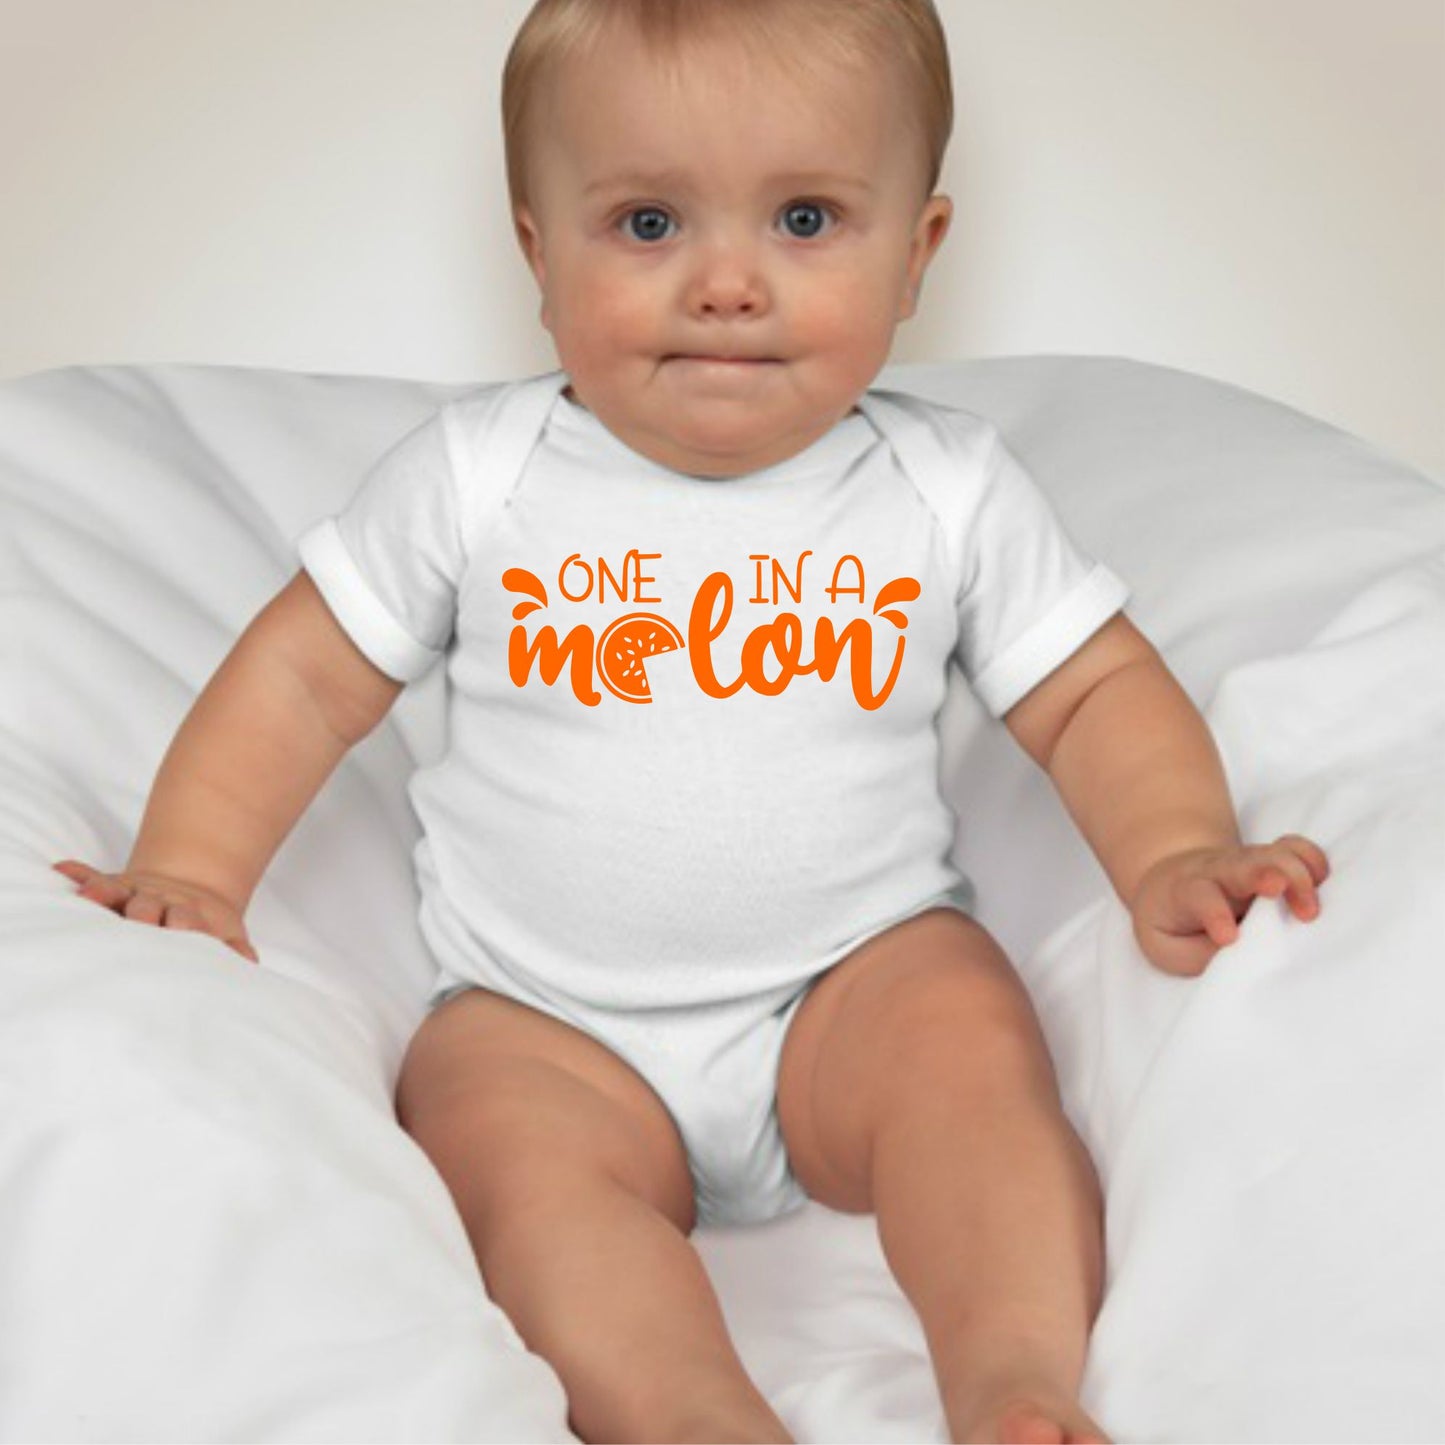 Baby Statement Onesies - One In a Melon